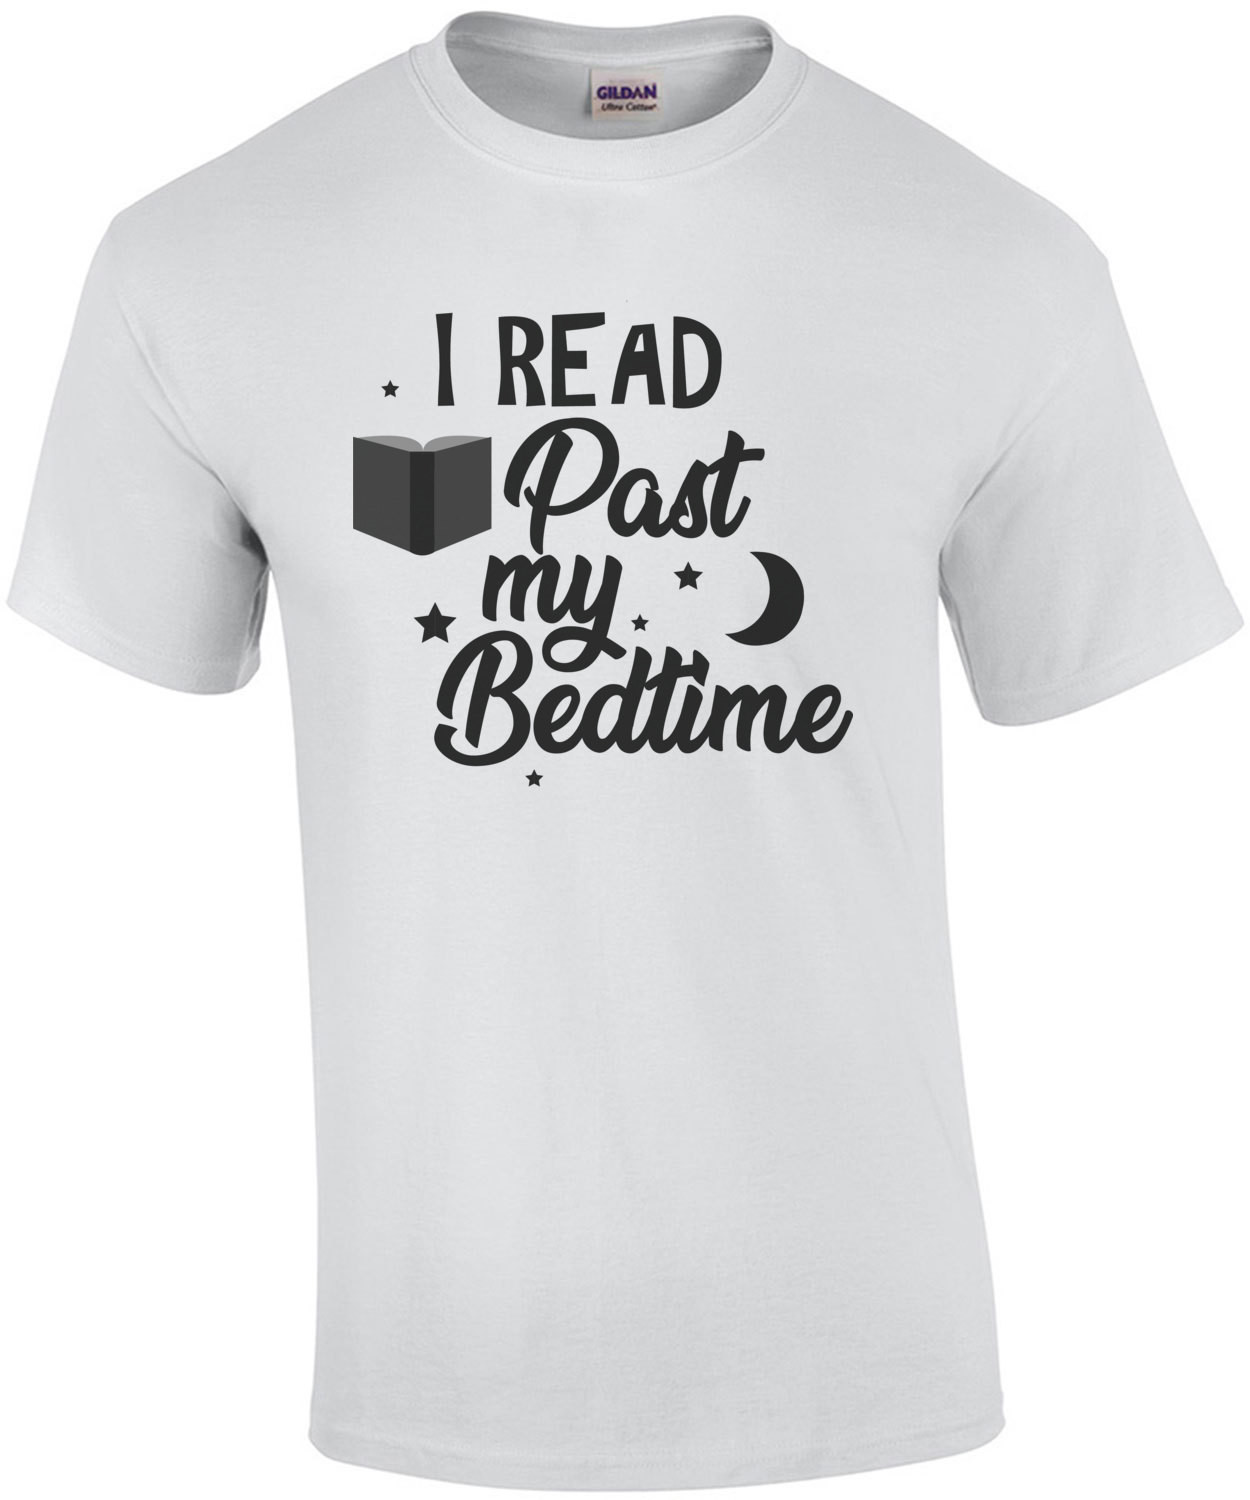 I read past my bedtime - funny book t-shirt